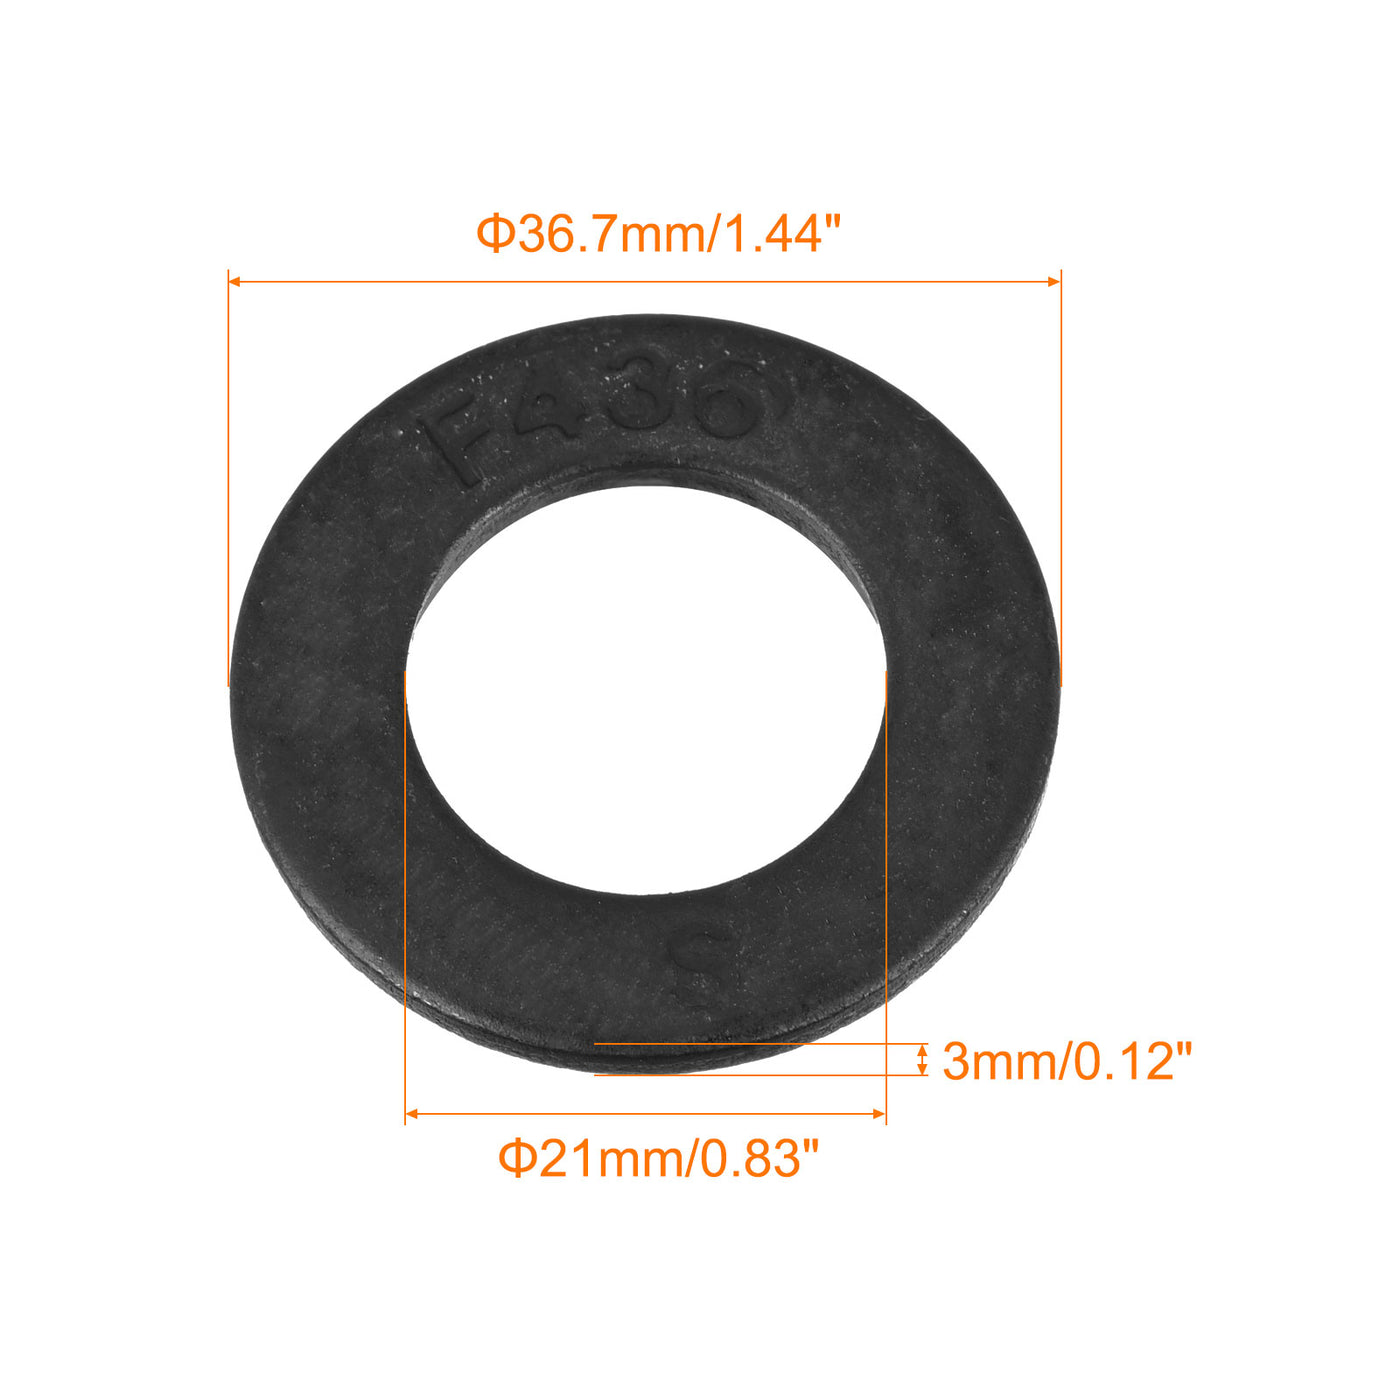 uxcell Uxcell 3/4-Inch Flat Washer, Alloy Steel Black Oxide Finish Pack of 25